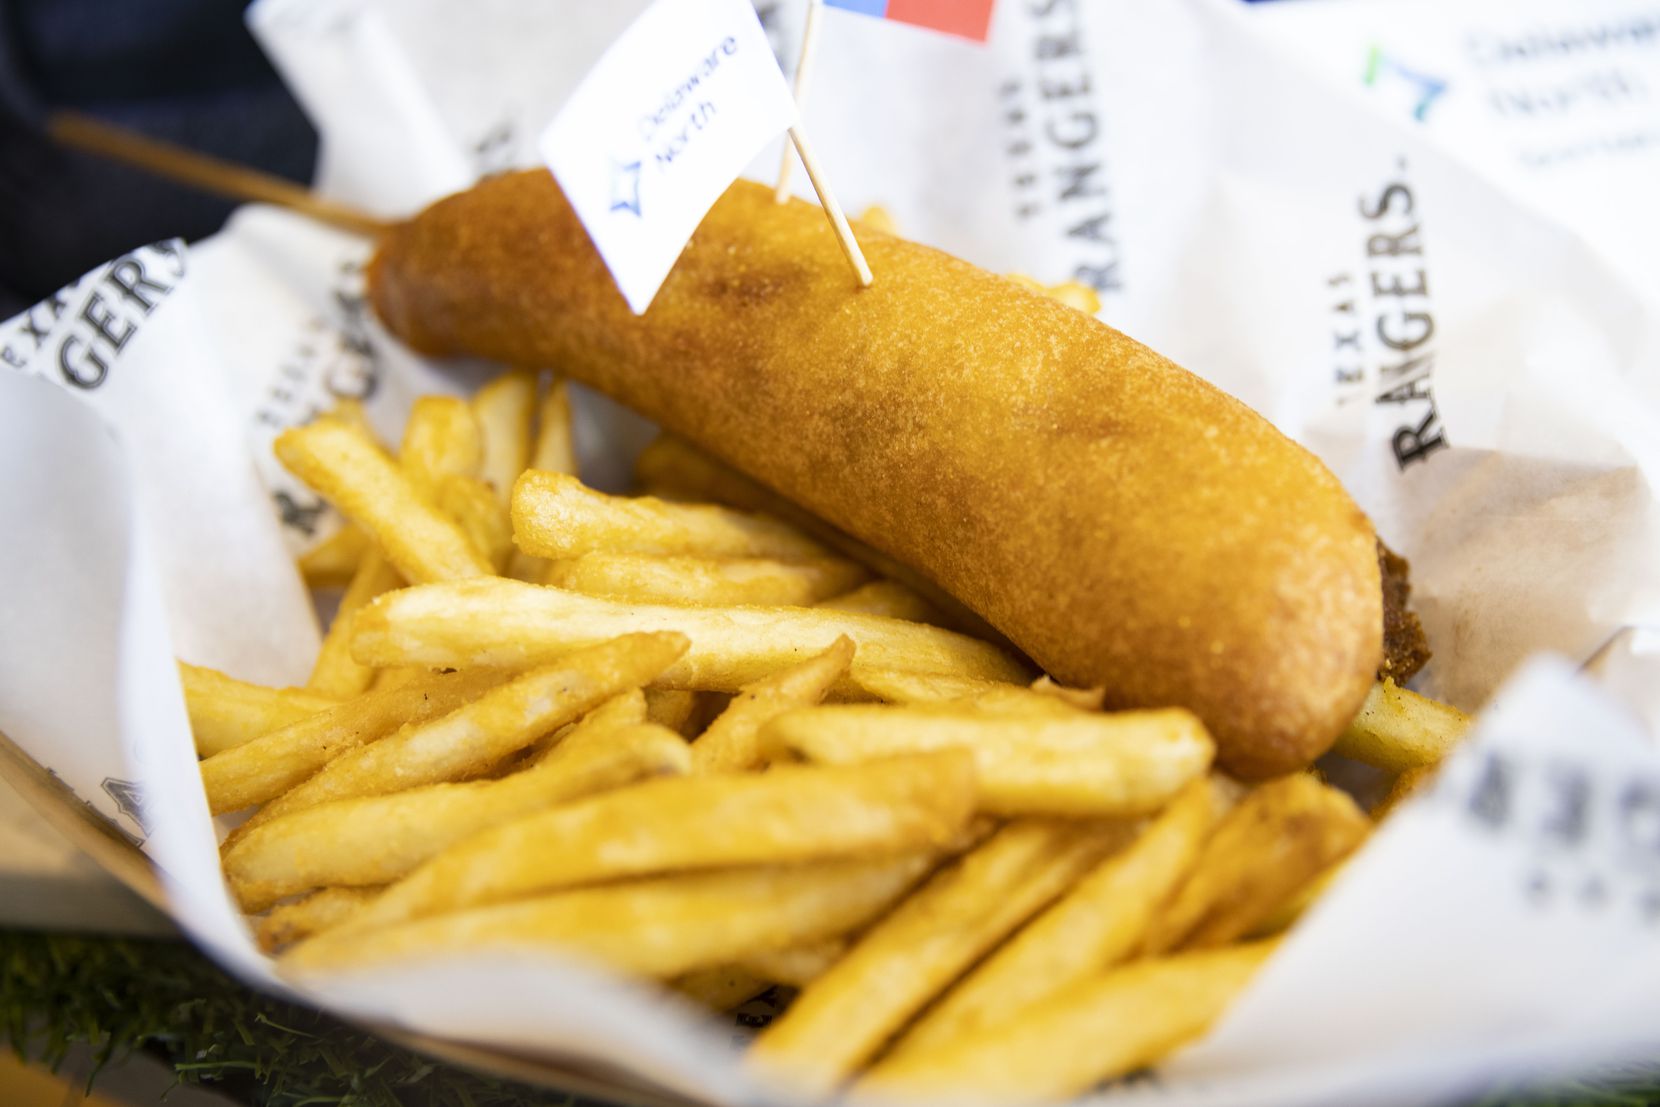 The ballpark has sold rattlesnake sausage before. In 2022, it's an alligator corn dog.